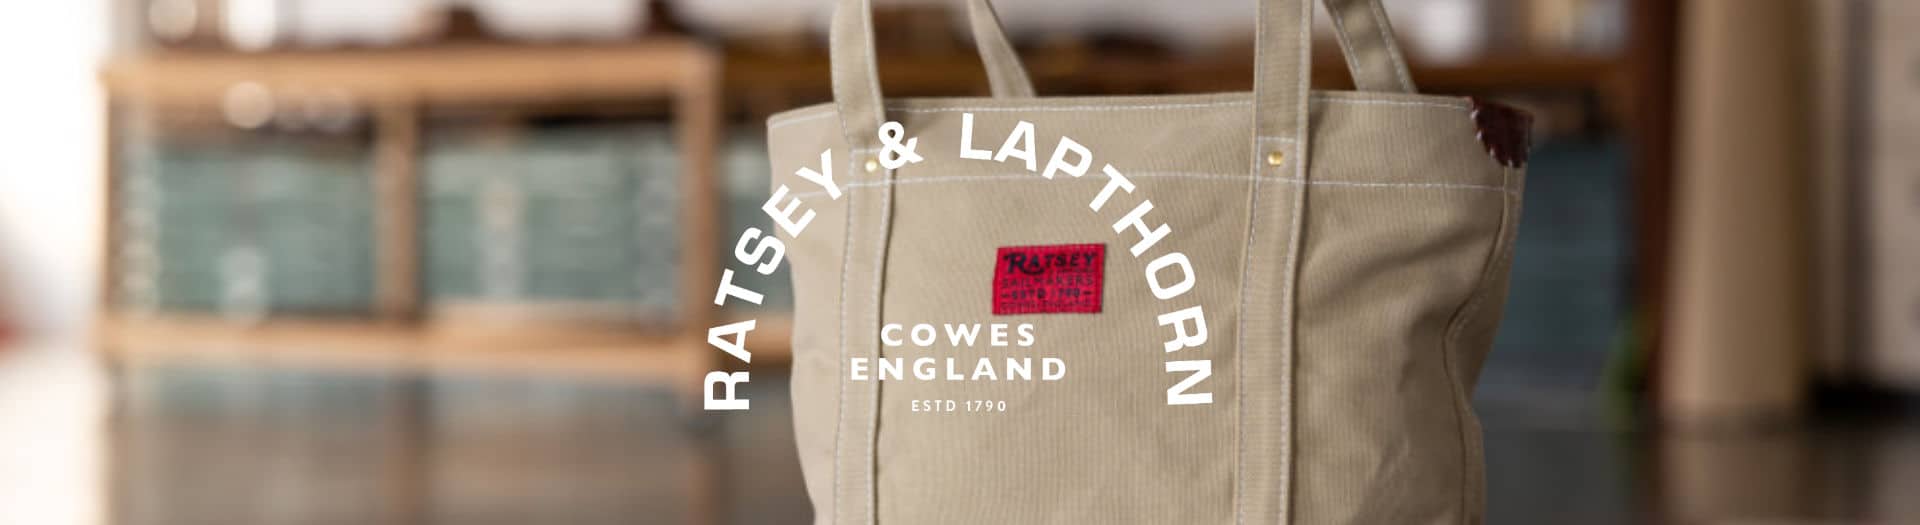 Ratsey and lapthorn sailmaker bags header